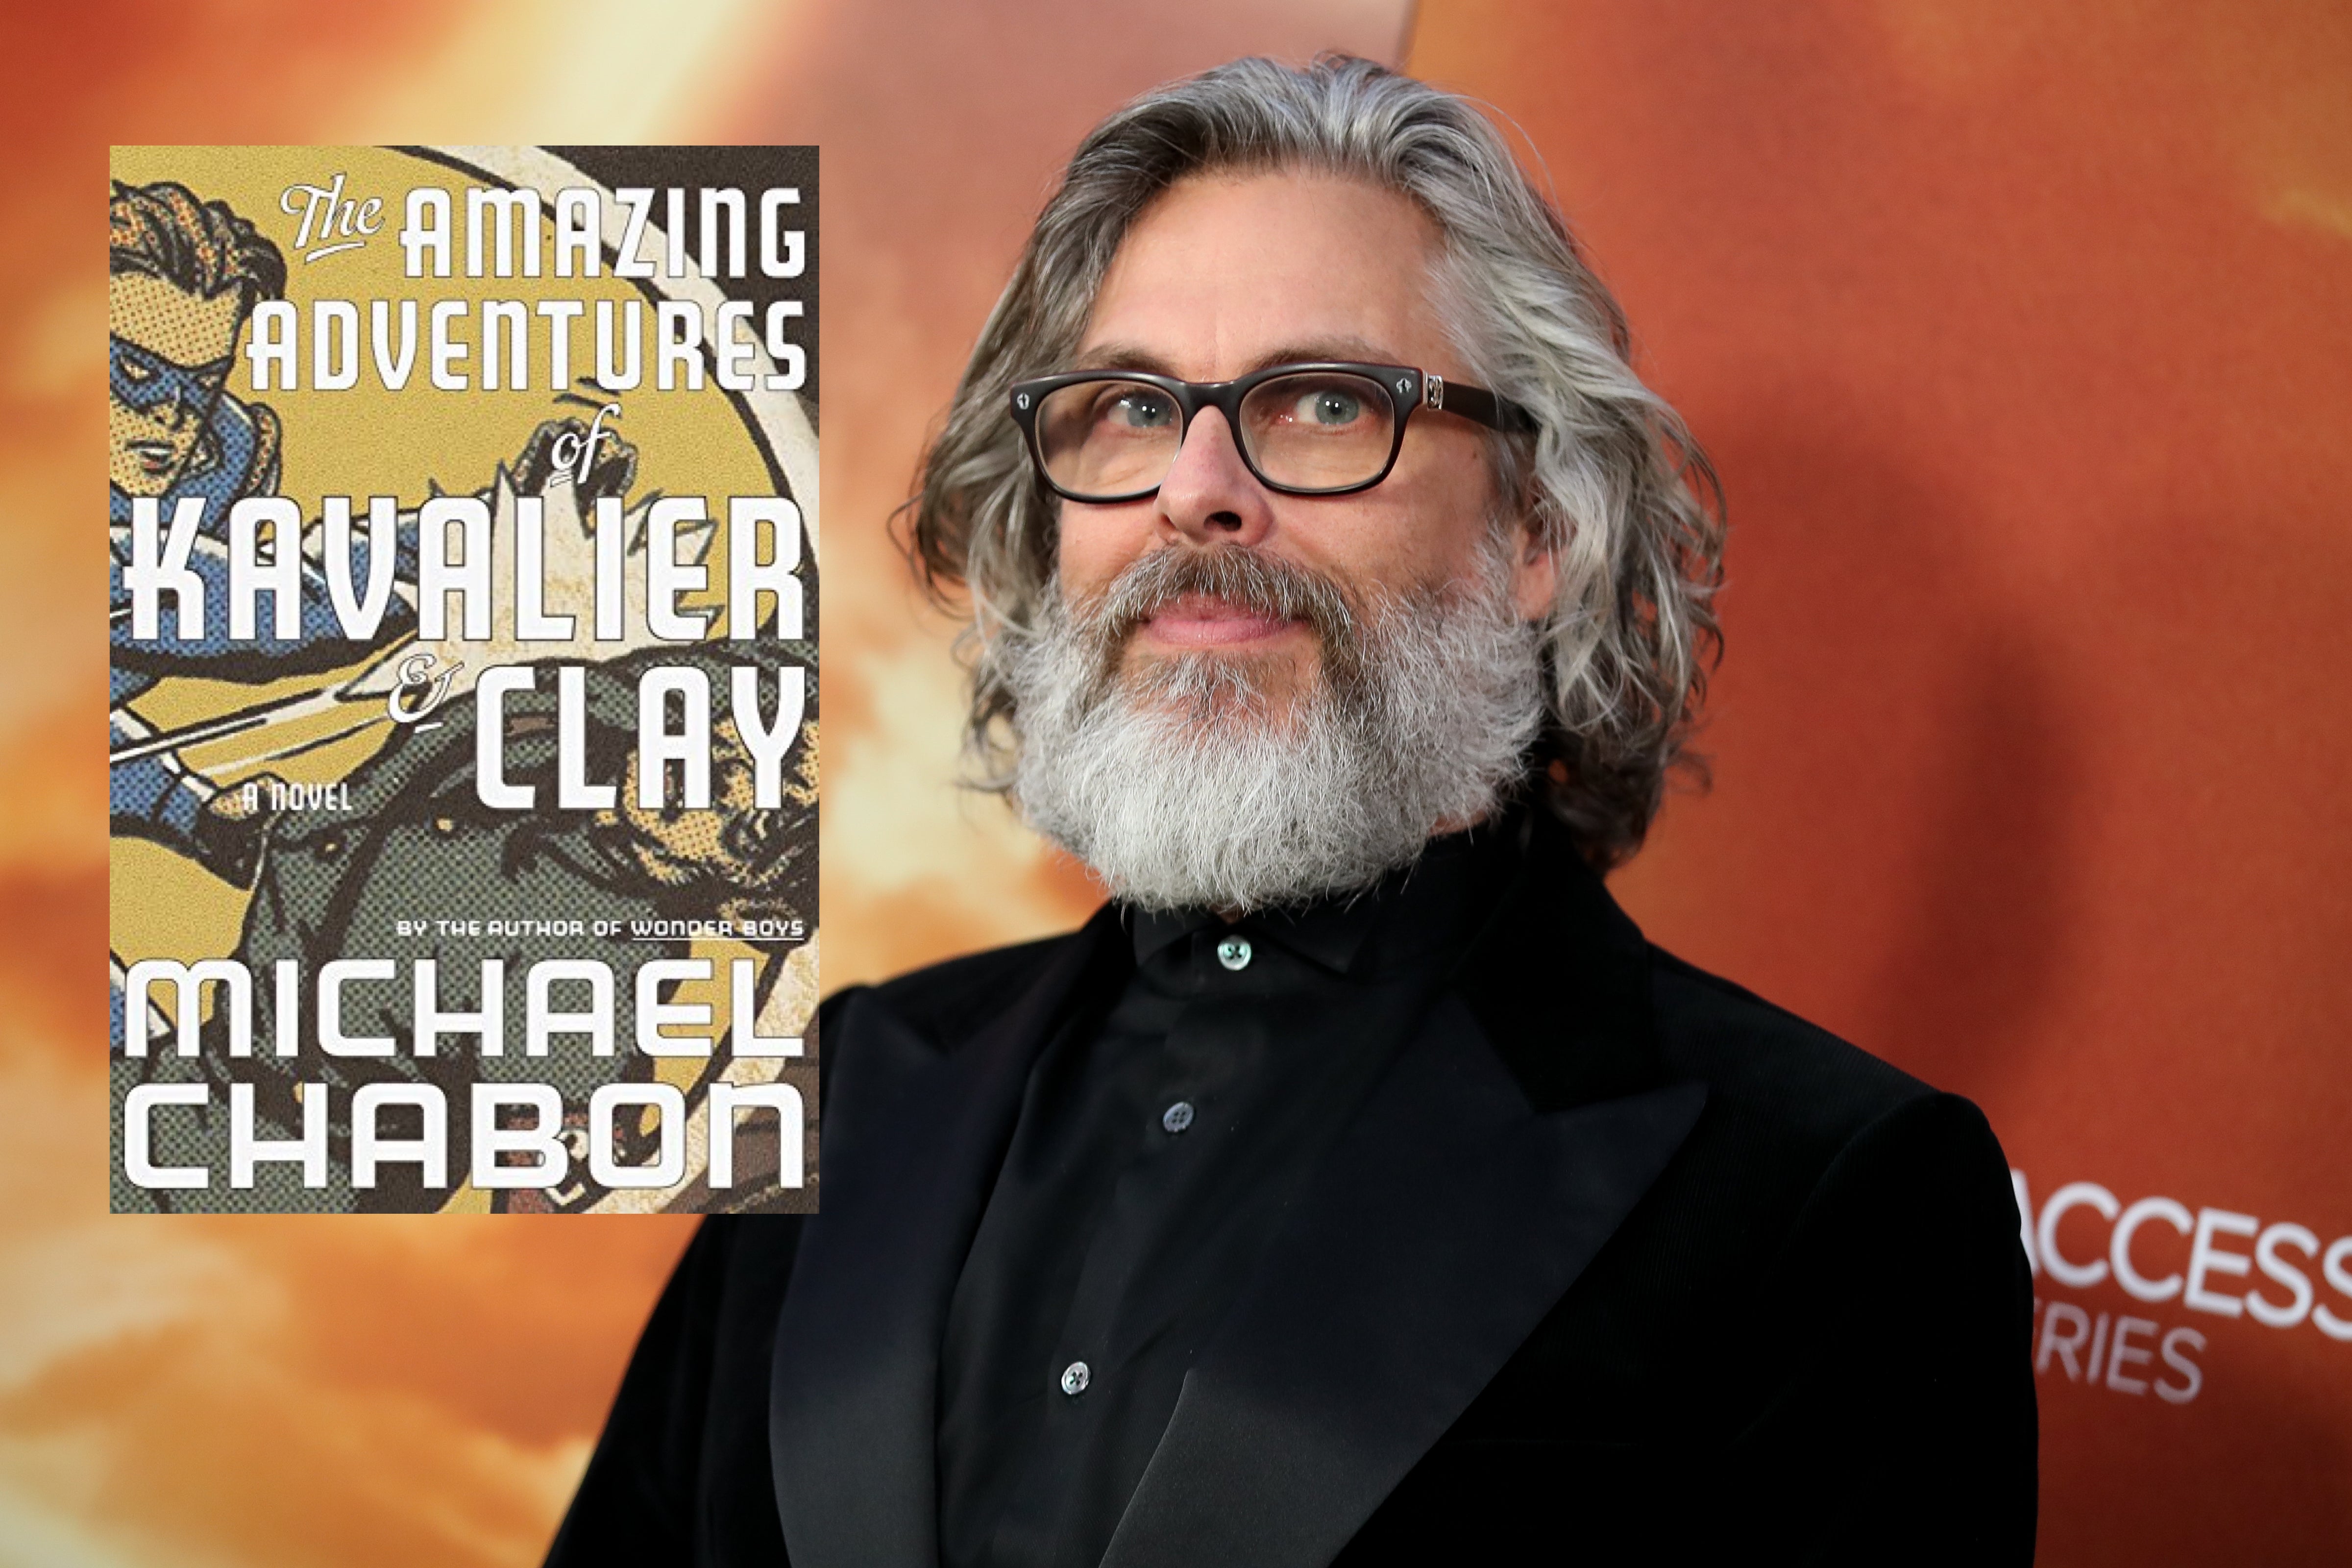 Michael Chabon in 2020 and (inset) the first edition cover of his 2001 Pulitzer Prize-winning novel